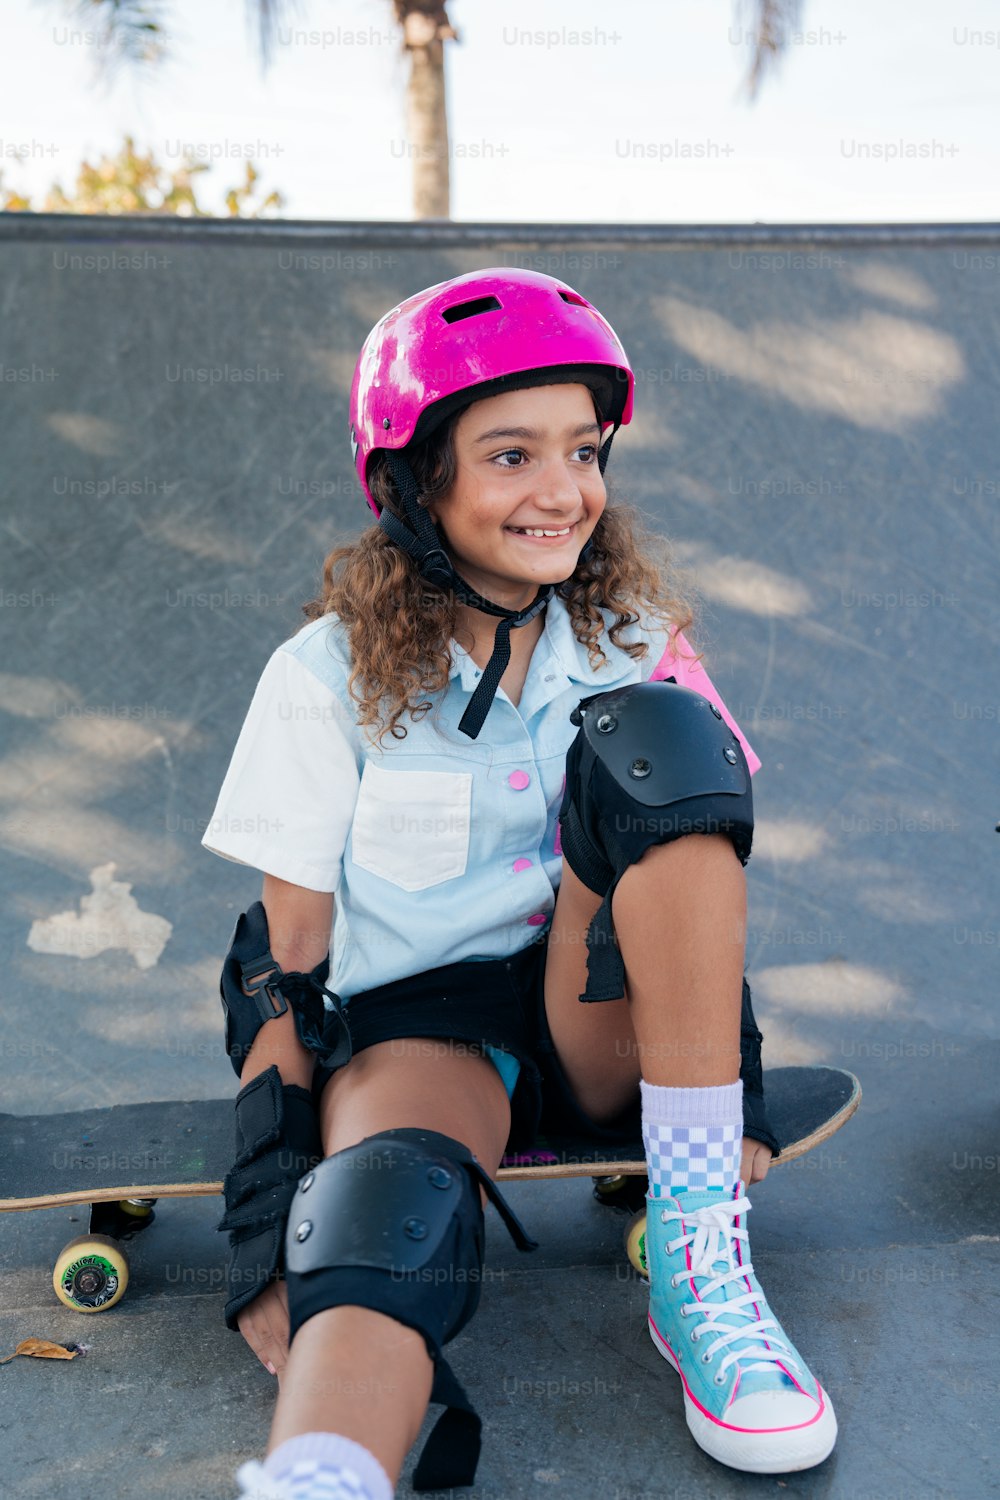 a young girl wearing a helmet and knee pads sitting on a skateboard